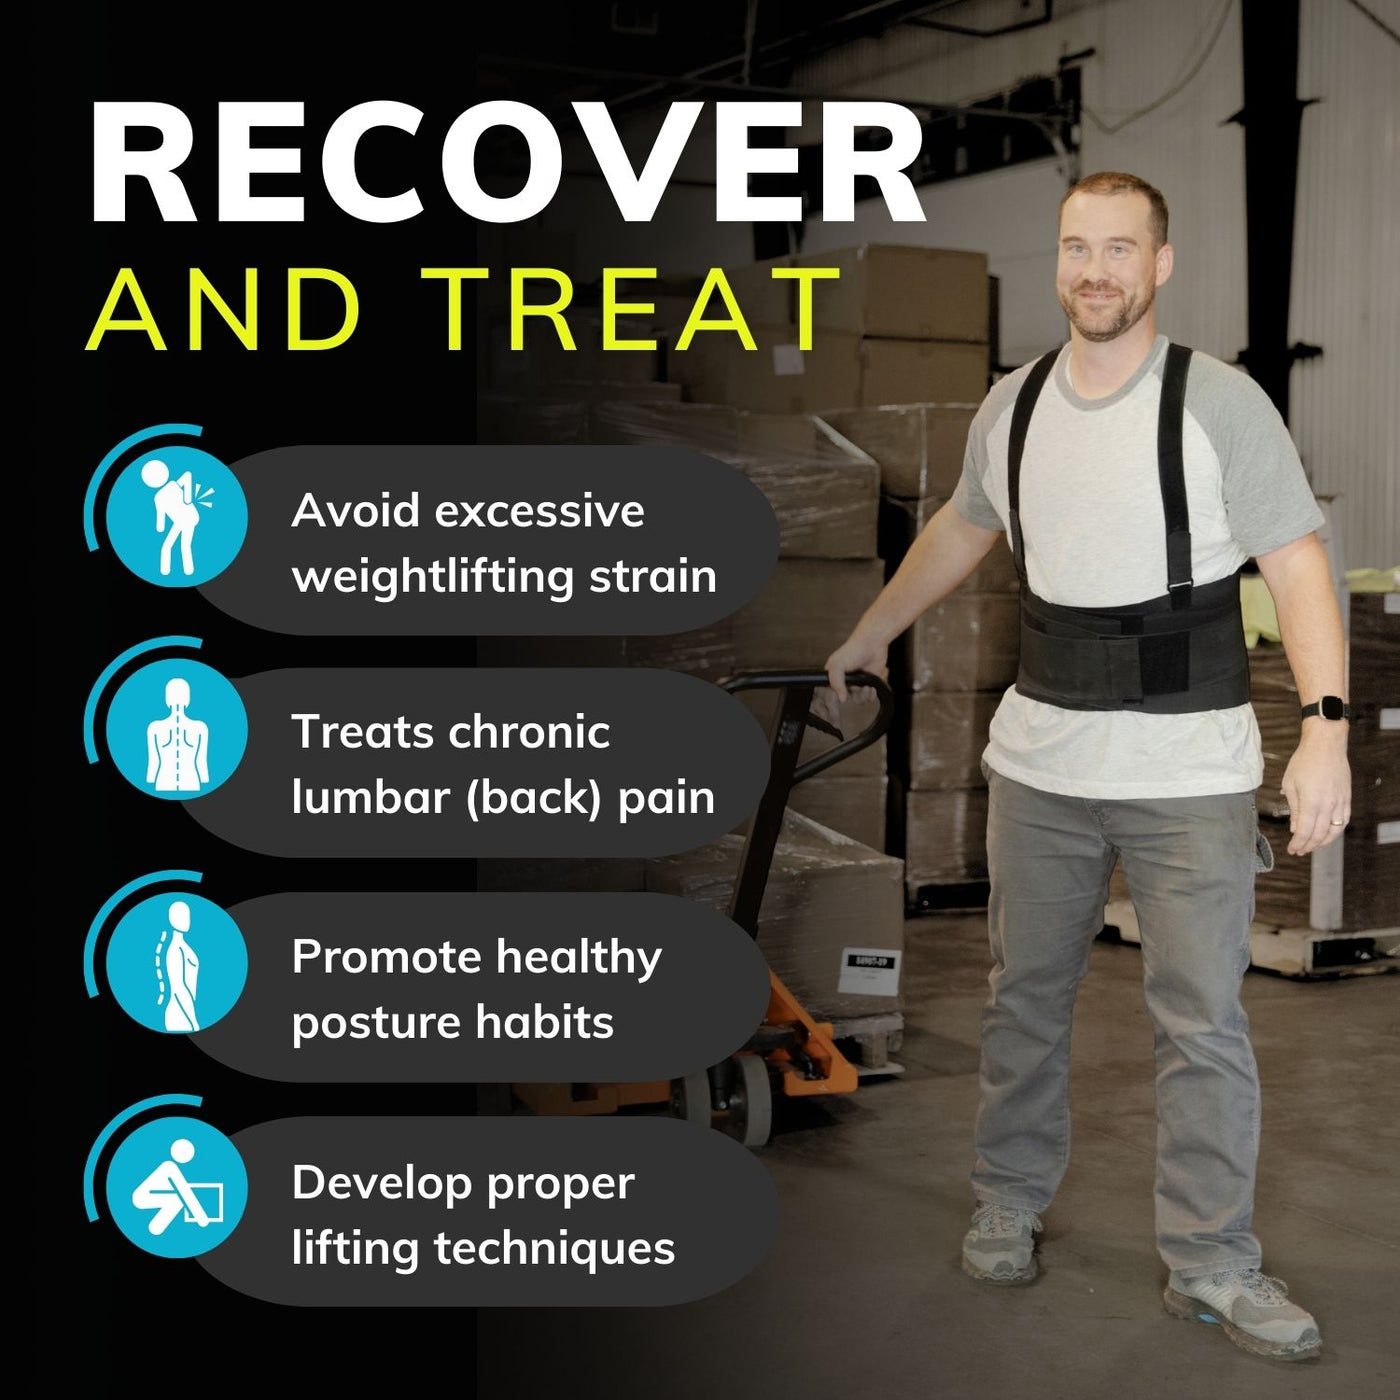 By wearing an industrial back brace to work you can prevent back pain and avoid straining your low back when lifting